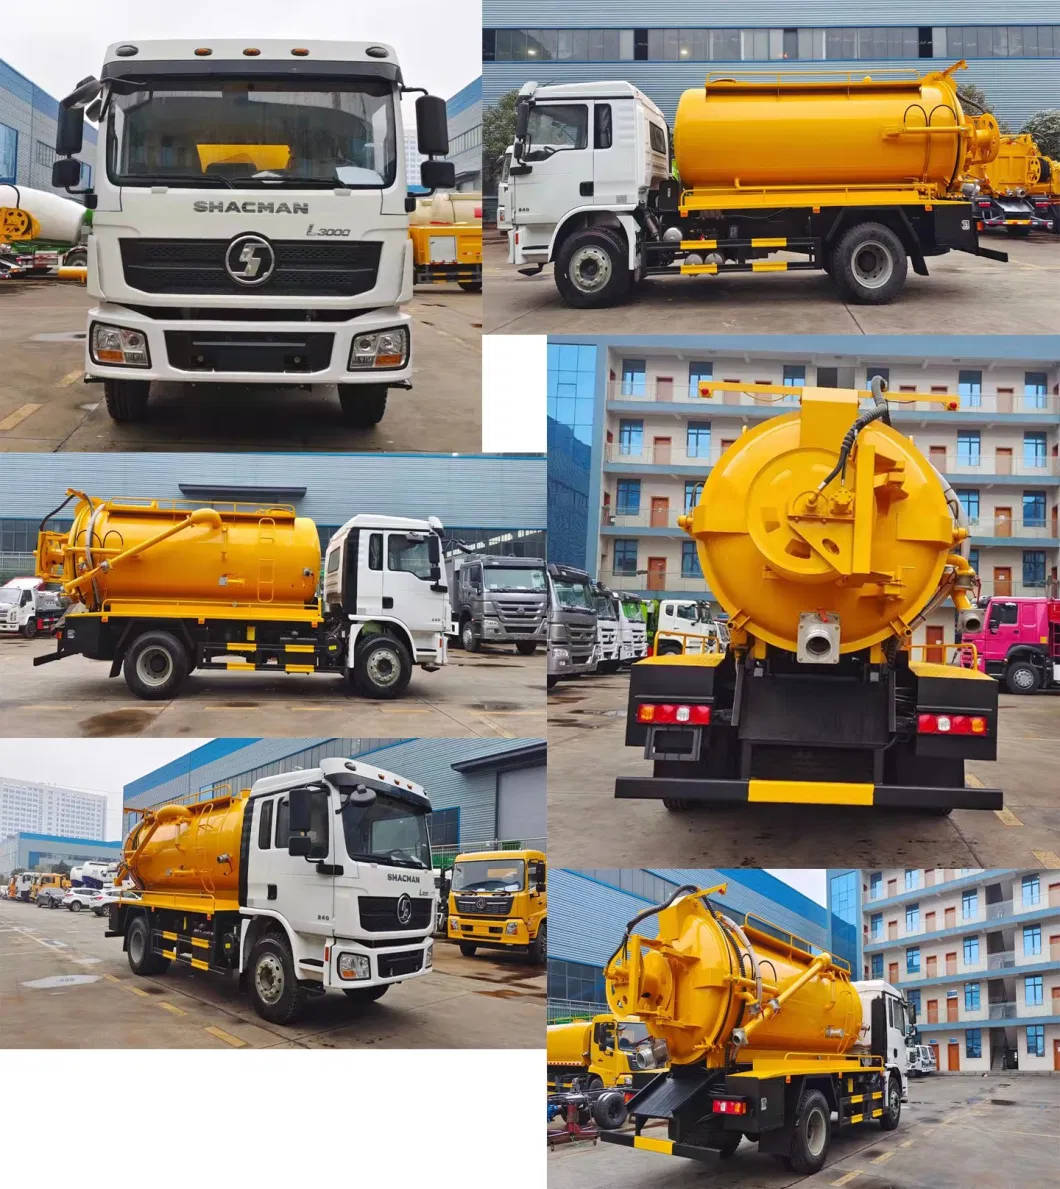 Shacman L3000 Vacuum Sewage Cleaning Tanker Fecal Sludge Suction Jetting Truck